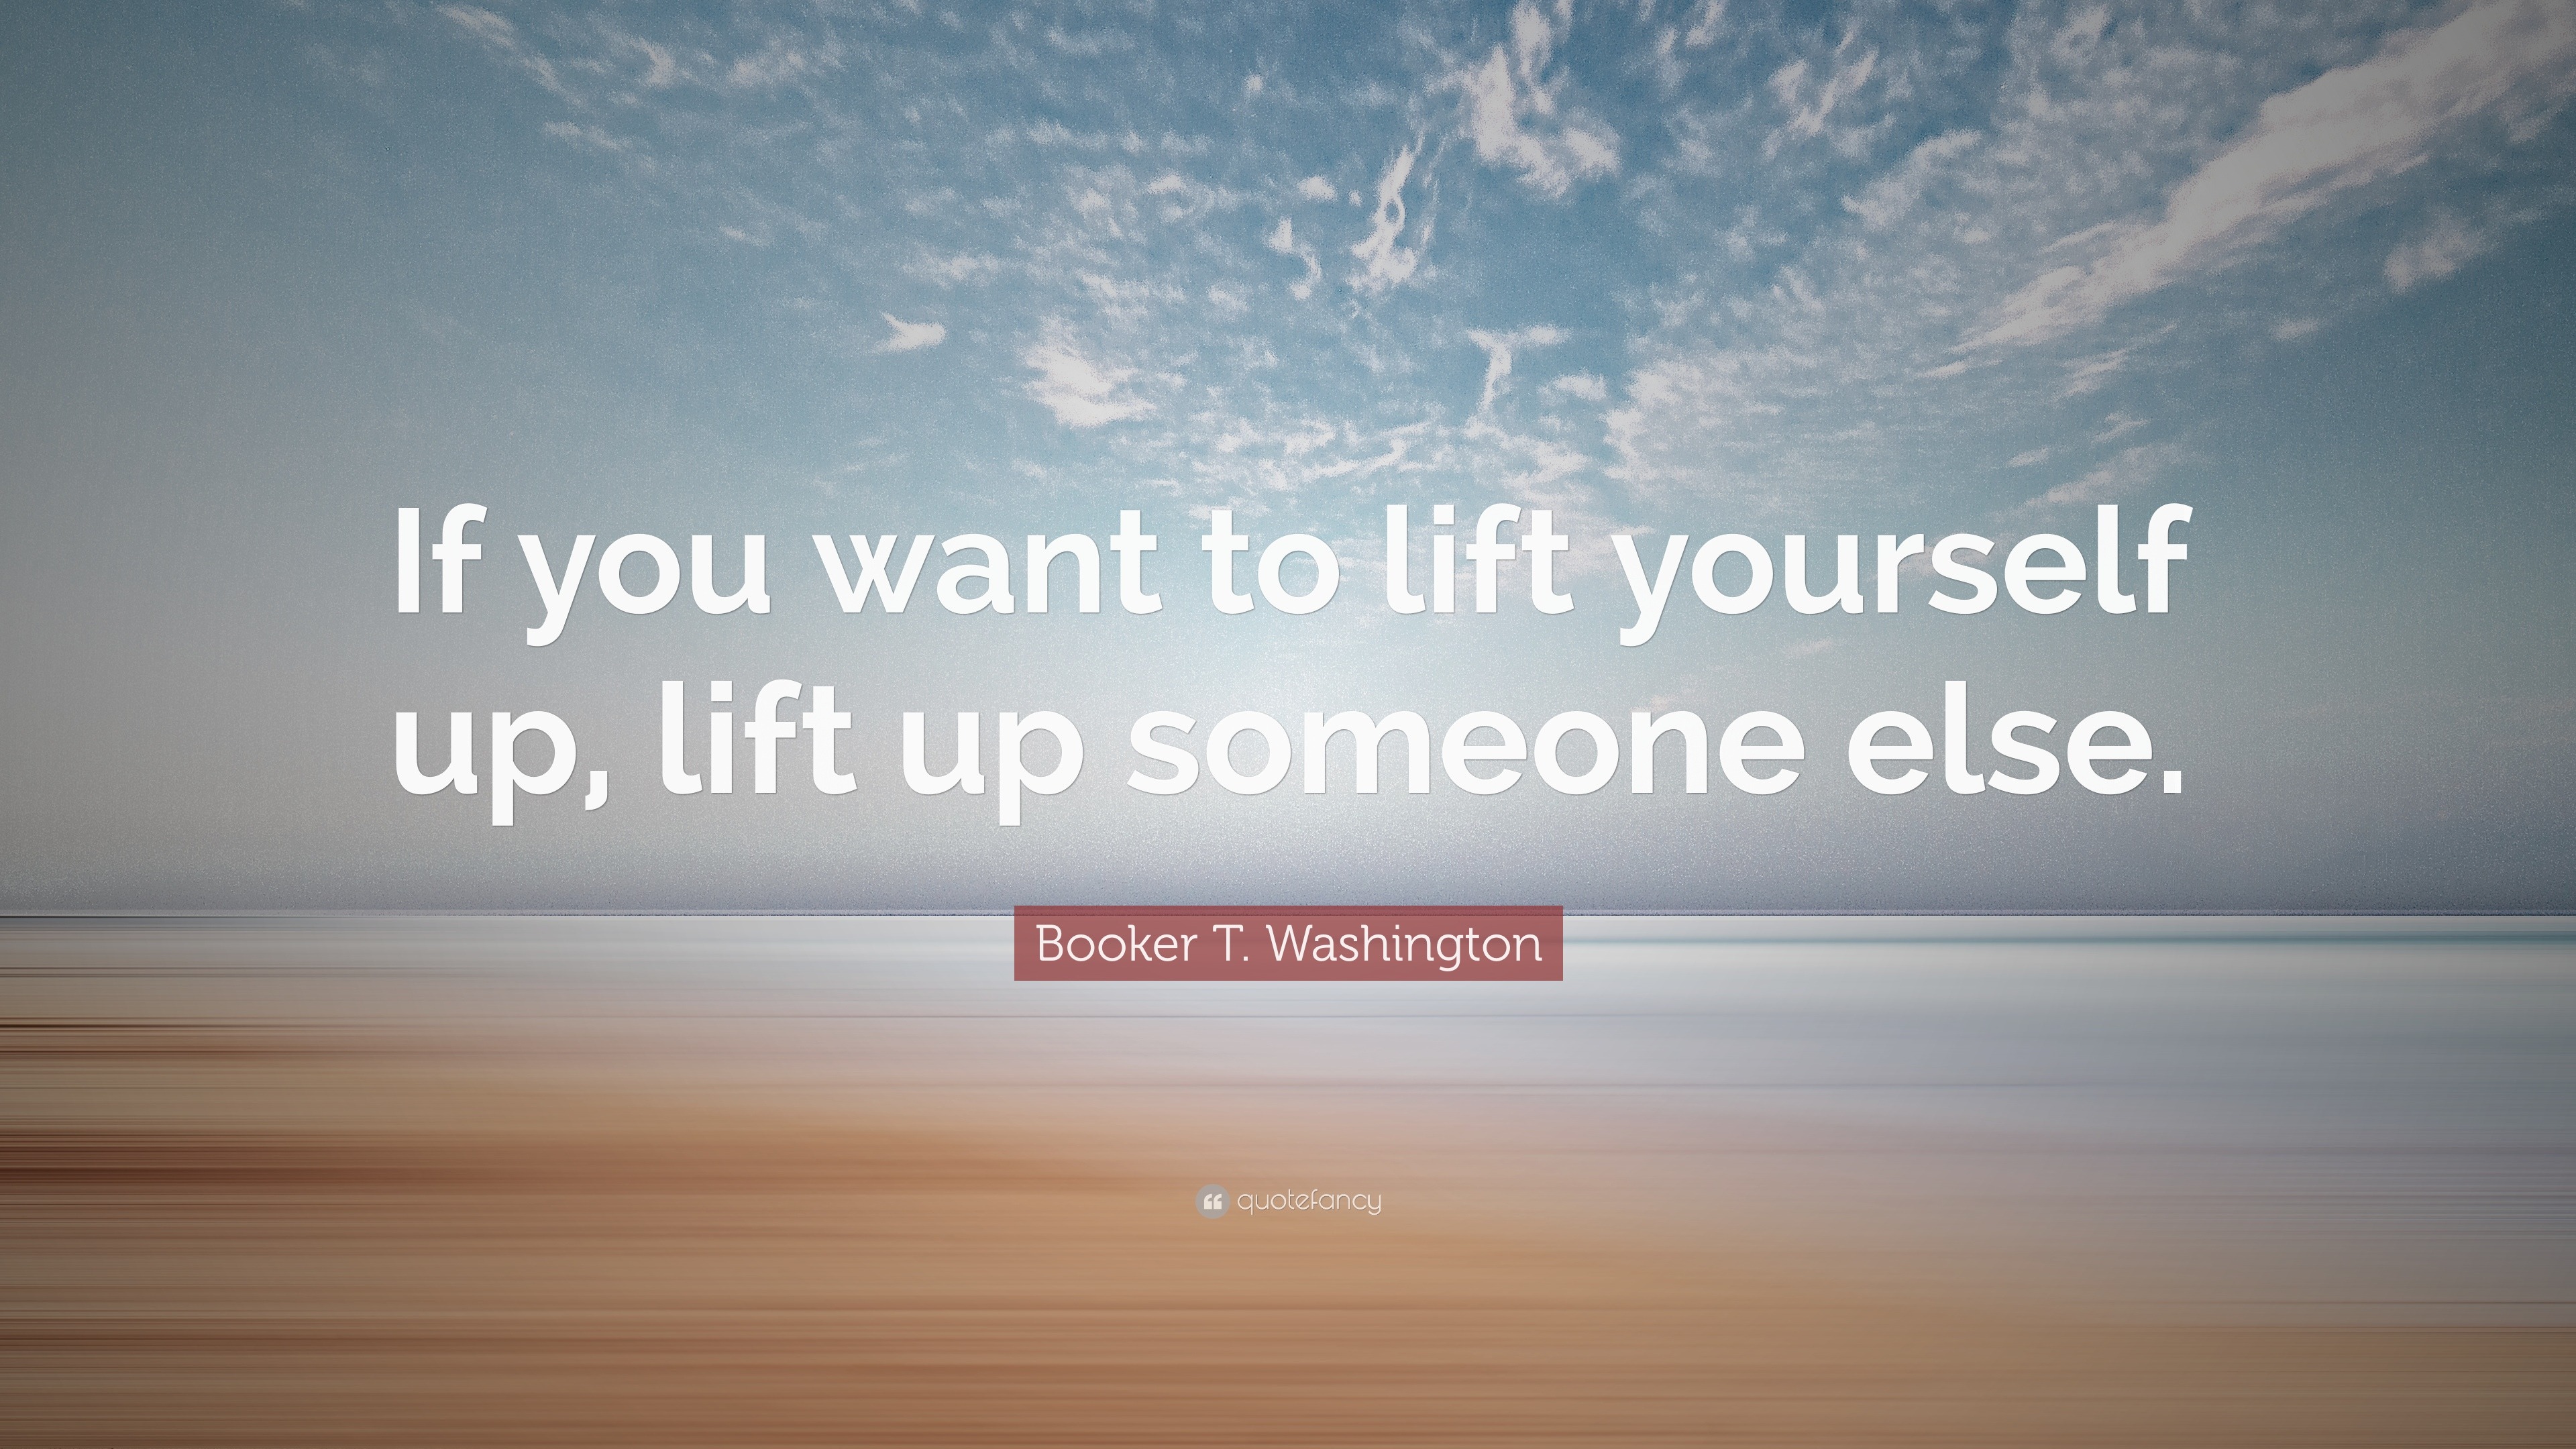 Booker T. Washington - If you want to lift yourself up